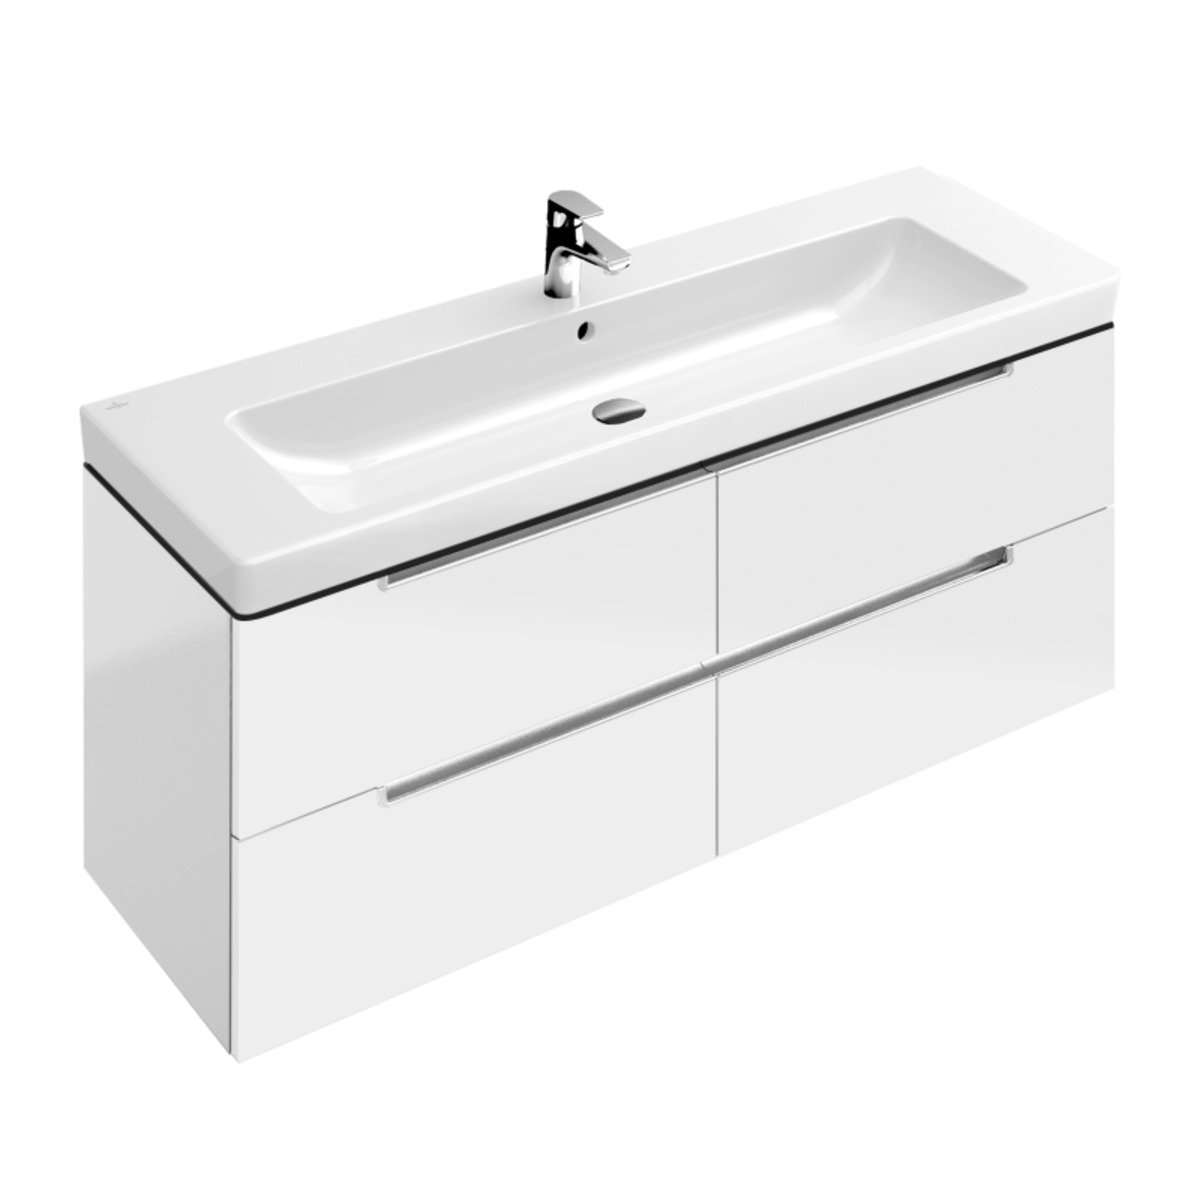 Picture of VILLEROY & BOCH Subway 2.0 vanity unit for washbasin A69800BM white